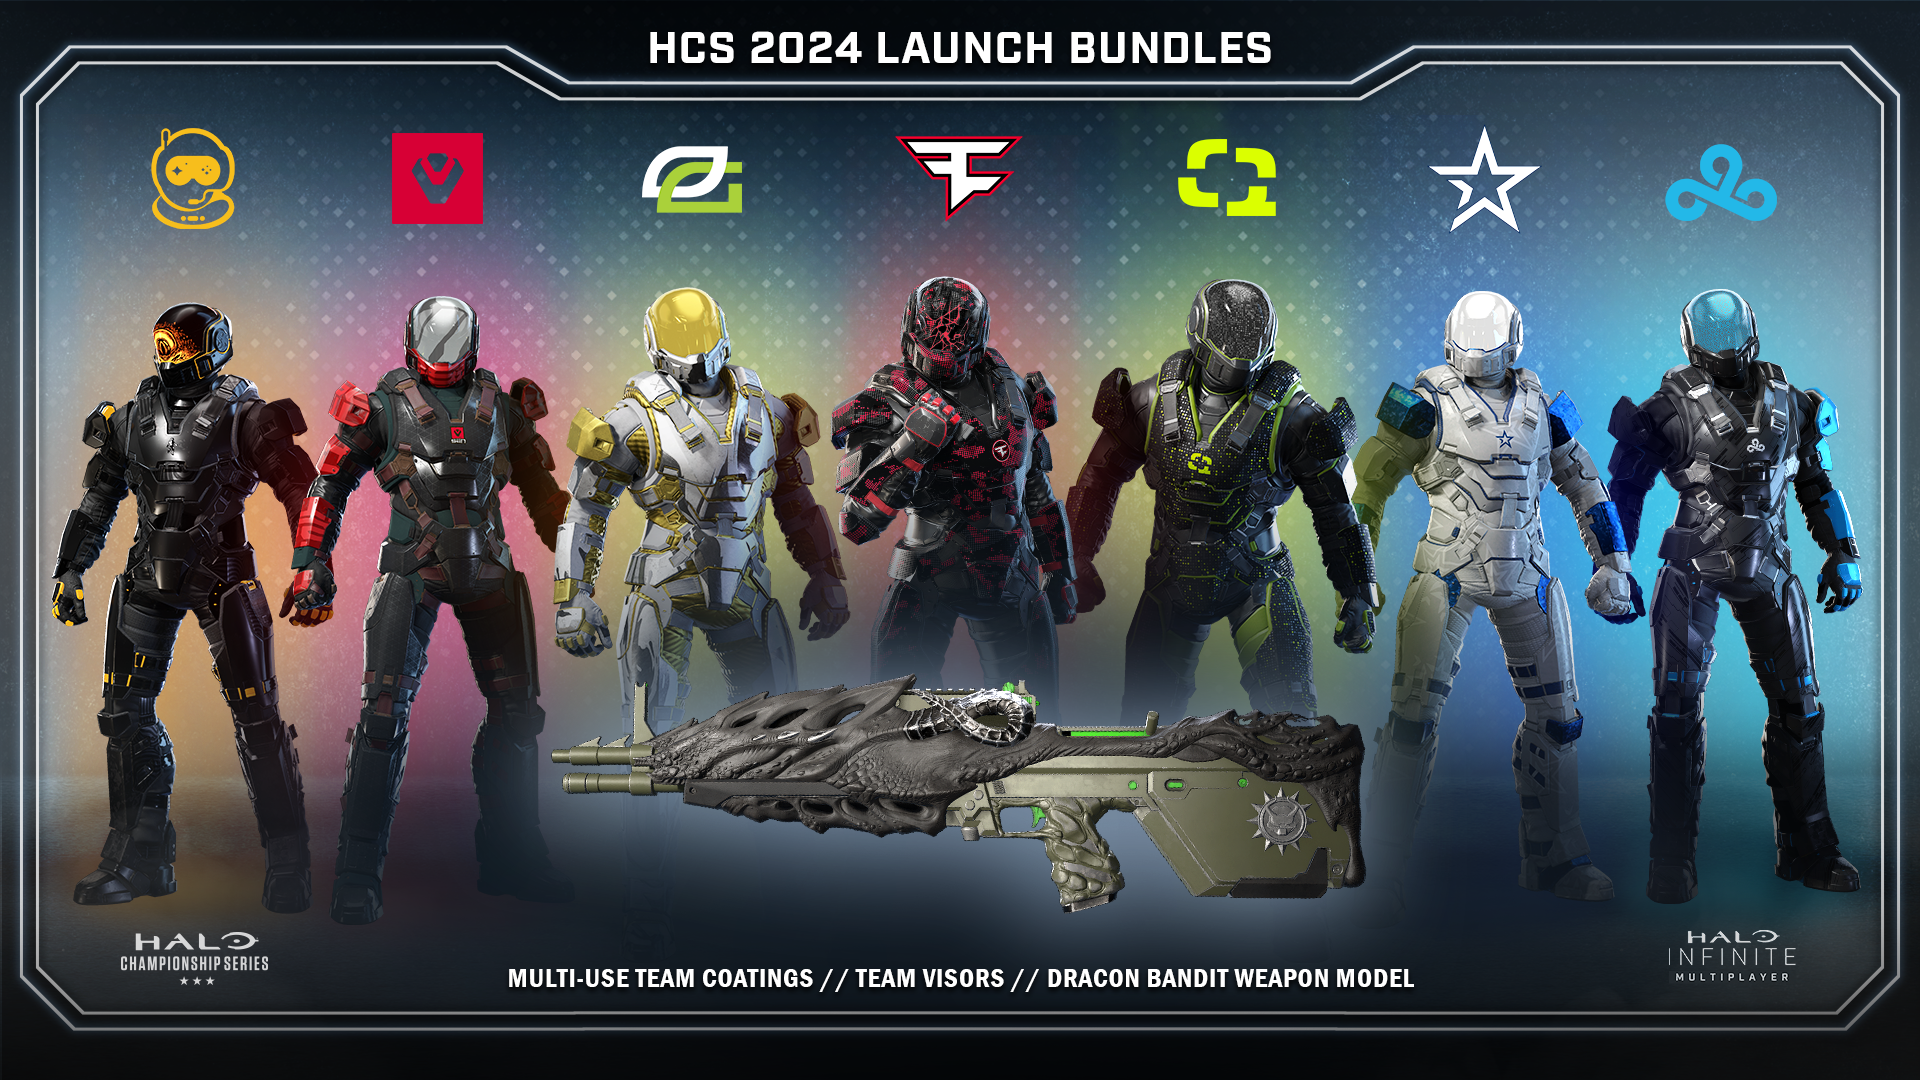 Halo Infinite image of the HCS 2024 Launch Bundles for partner teamss. Text reads: "Multi-use team coatings / team visors / Dracon Bandit weapon model"